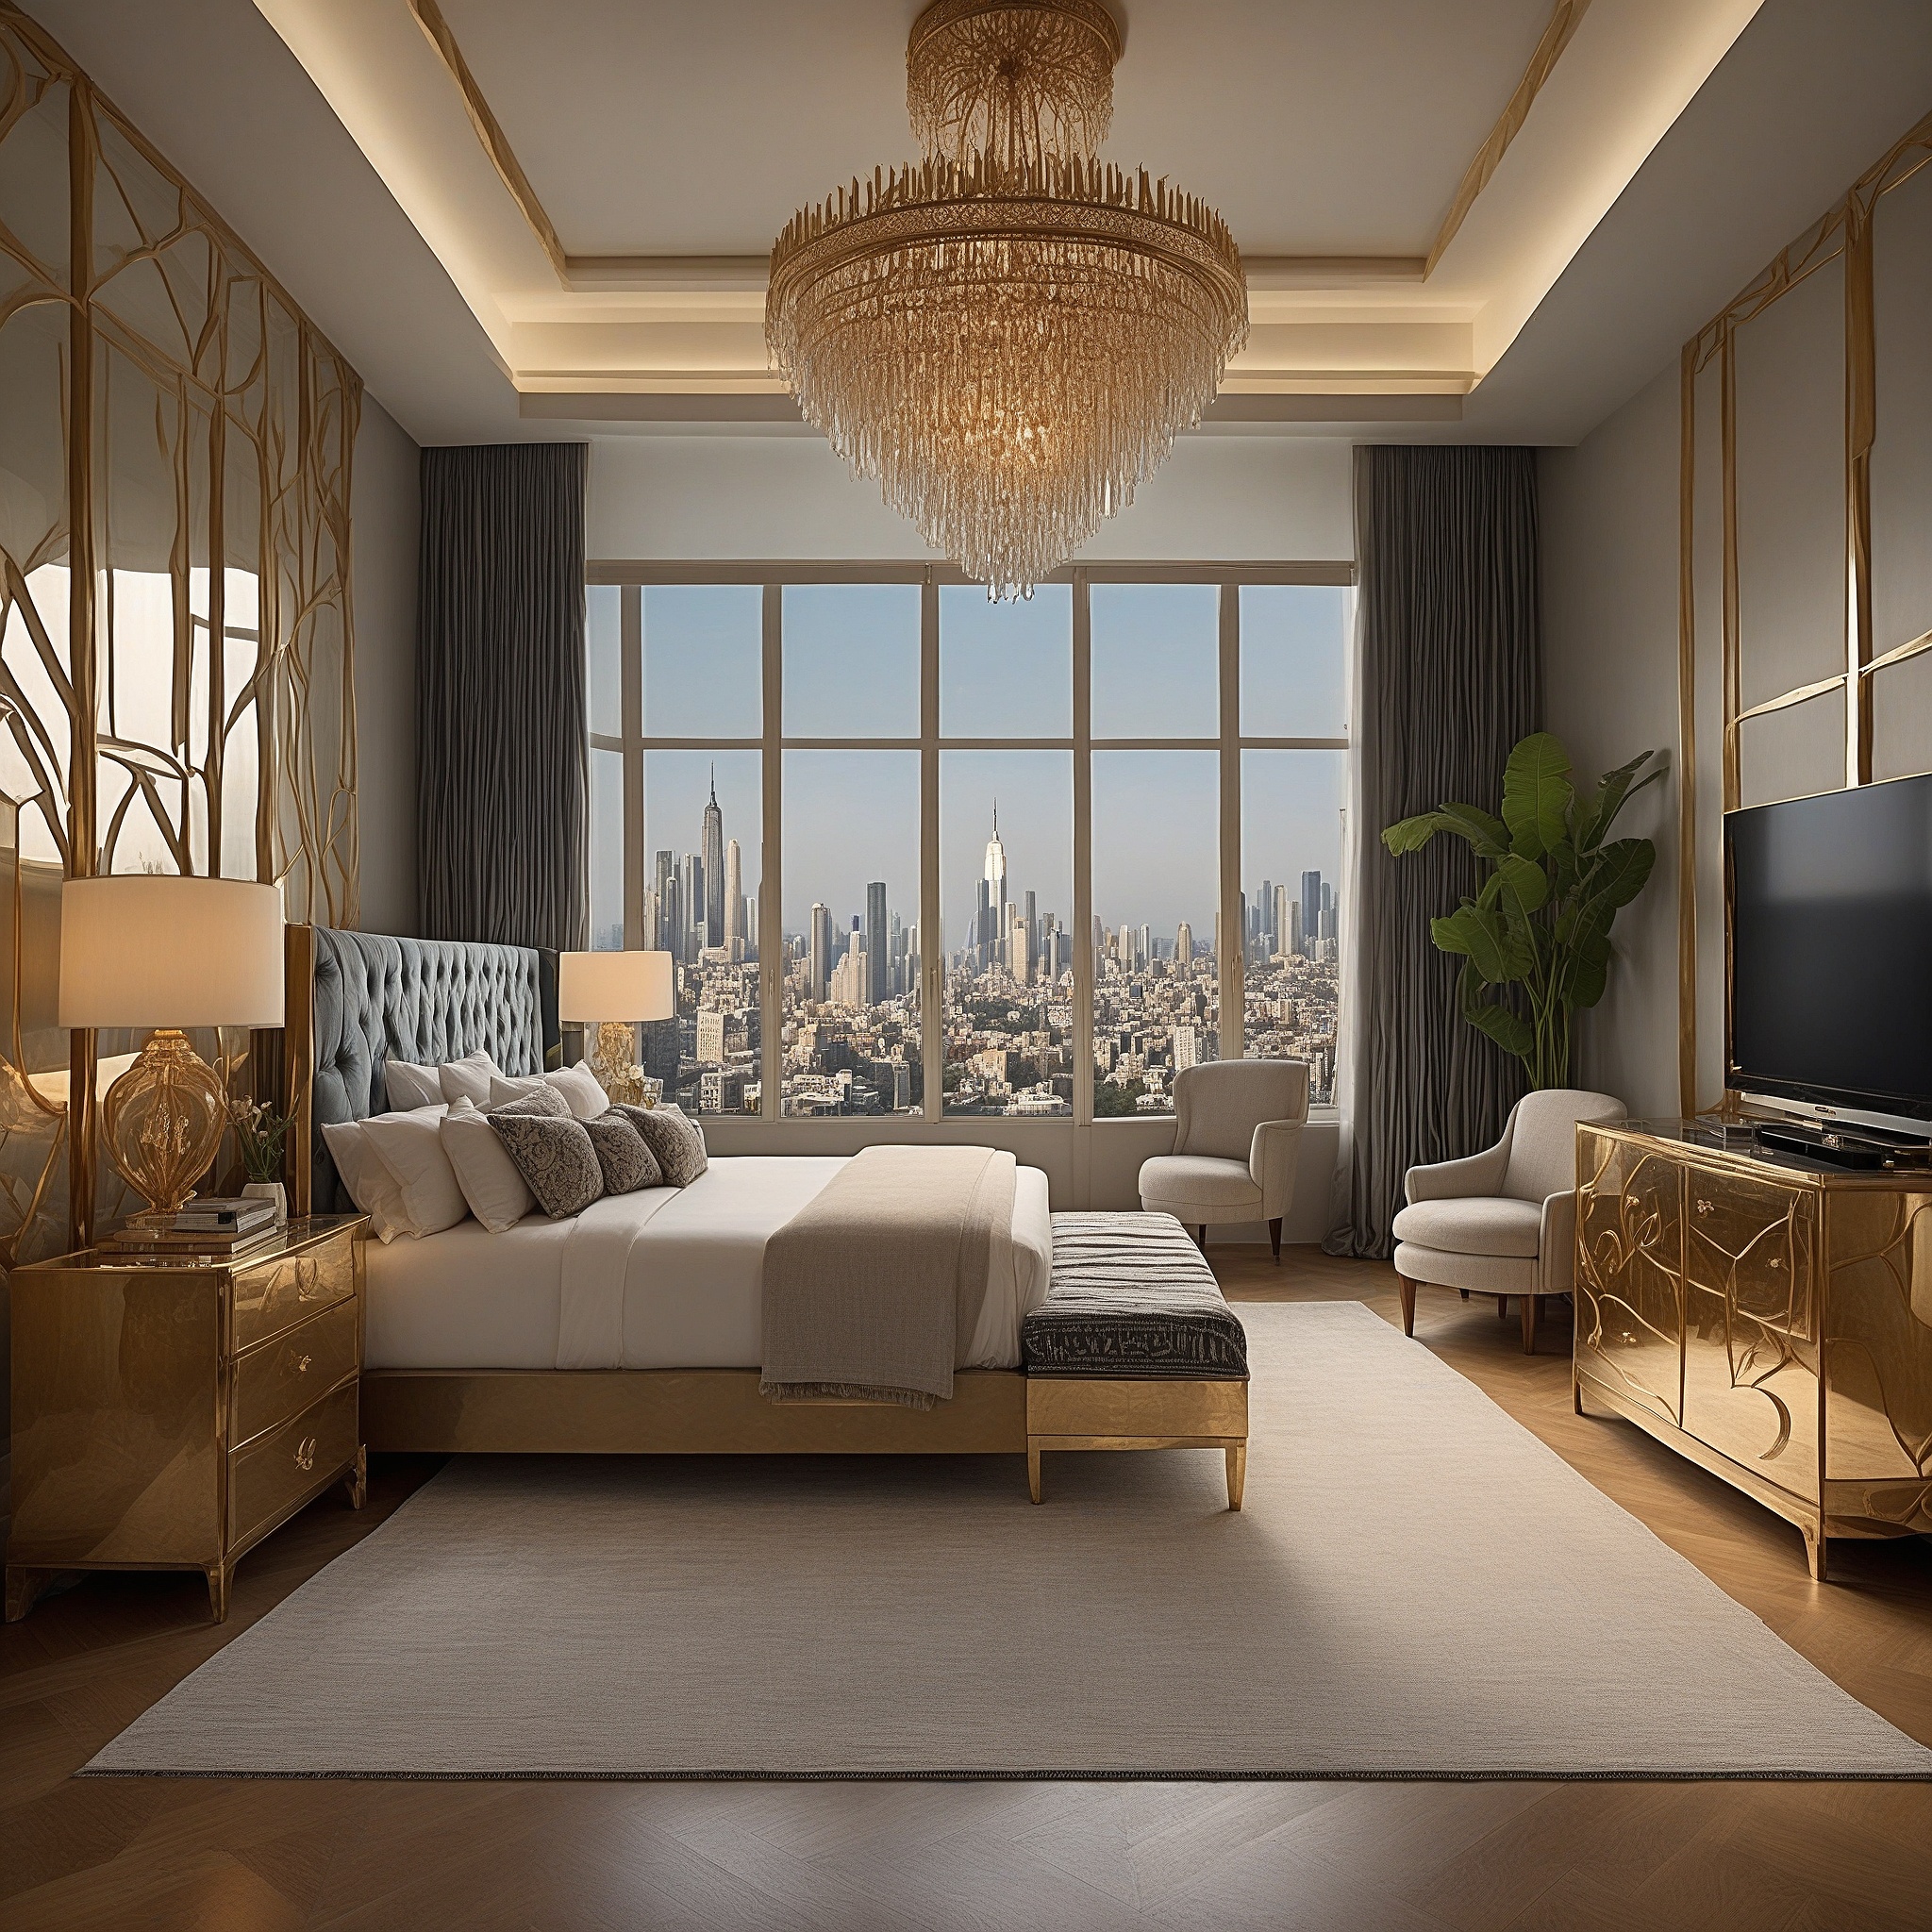 Art Deco Bedroom With Geometric Furniture And Gold Finishes